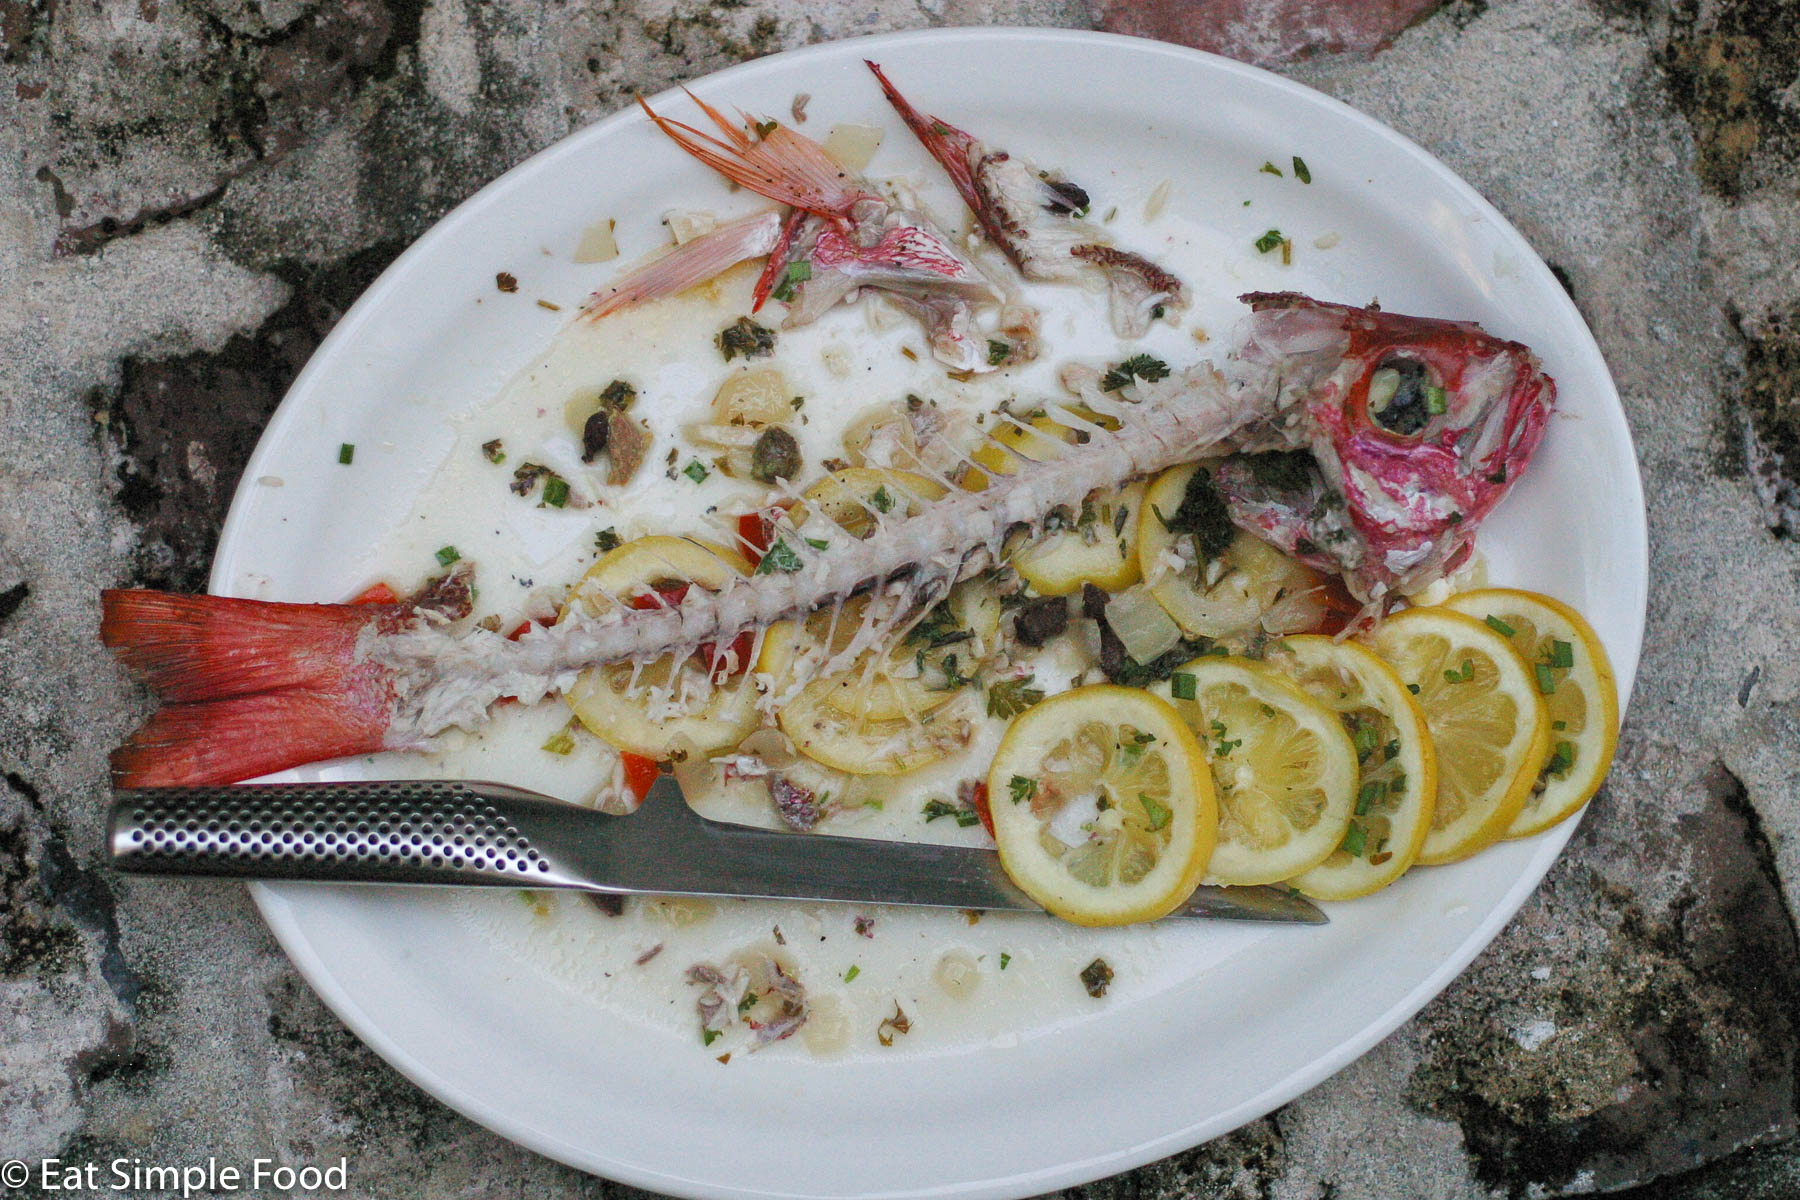 Red snapper on a plate with all the flesh eaten, exposing the bones / skeleton, head, and tail.